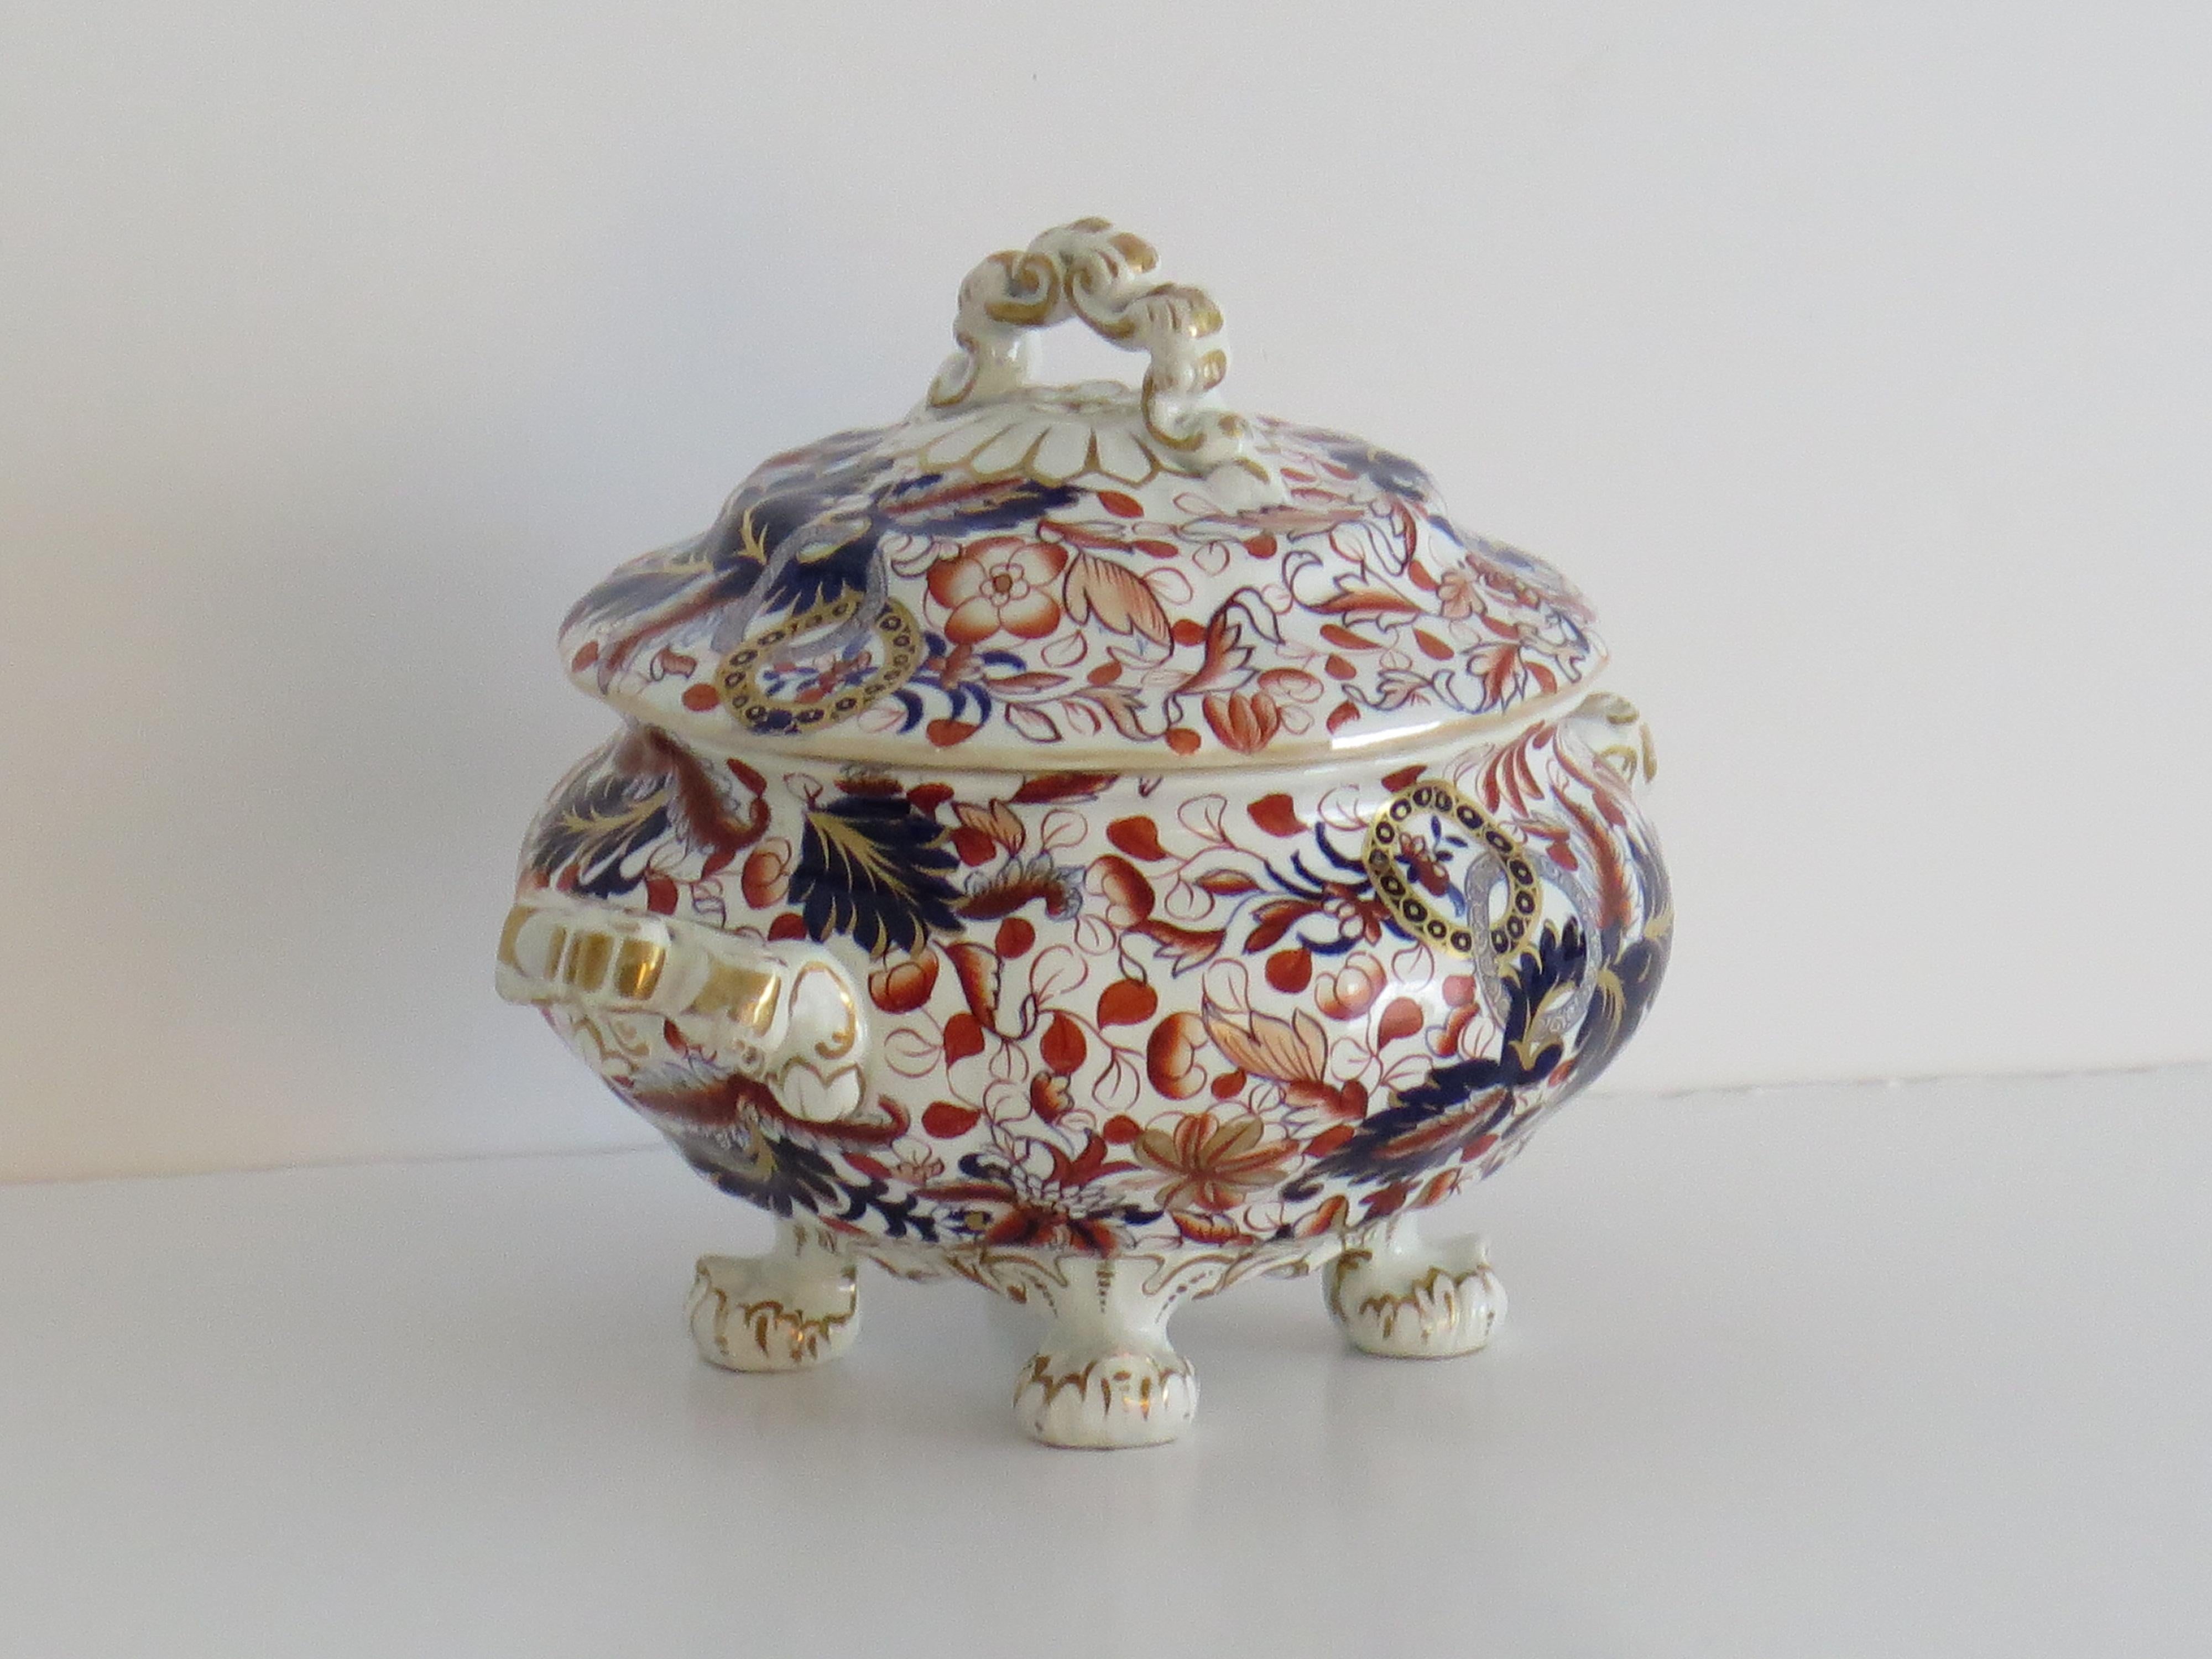 This is a very good sauce tureen made of ironstone (Spode's Stone China) in Pattern No 5519, produced by the English, Copeland & Garrett - Spode factory in the 19th century, Circa 1837 to 1847

The piece is very well potted with two side handles